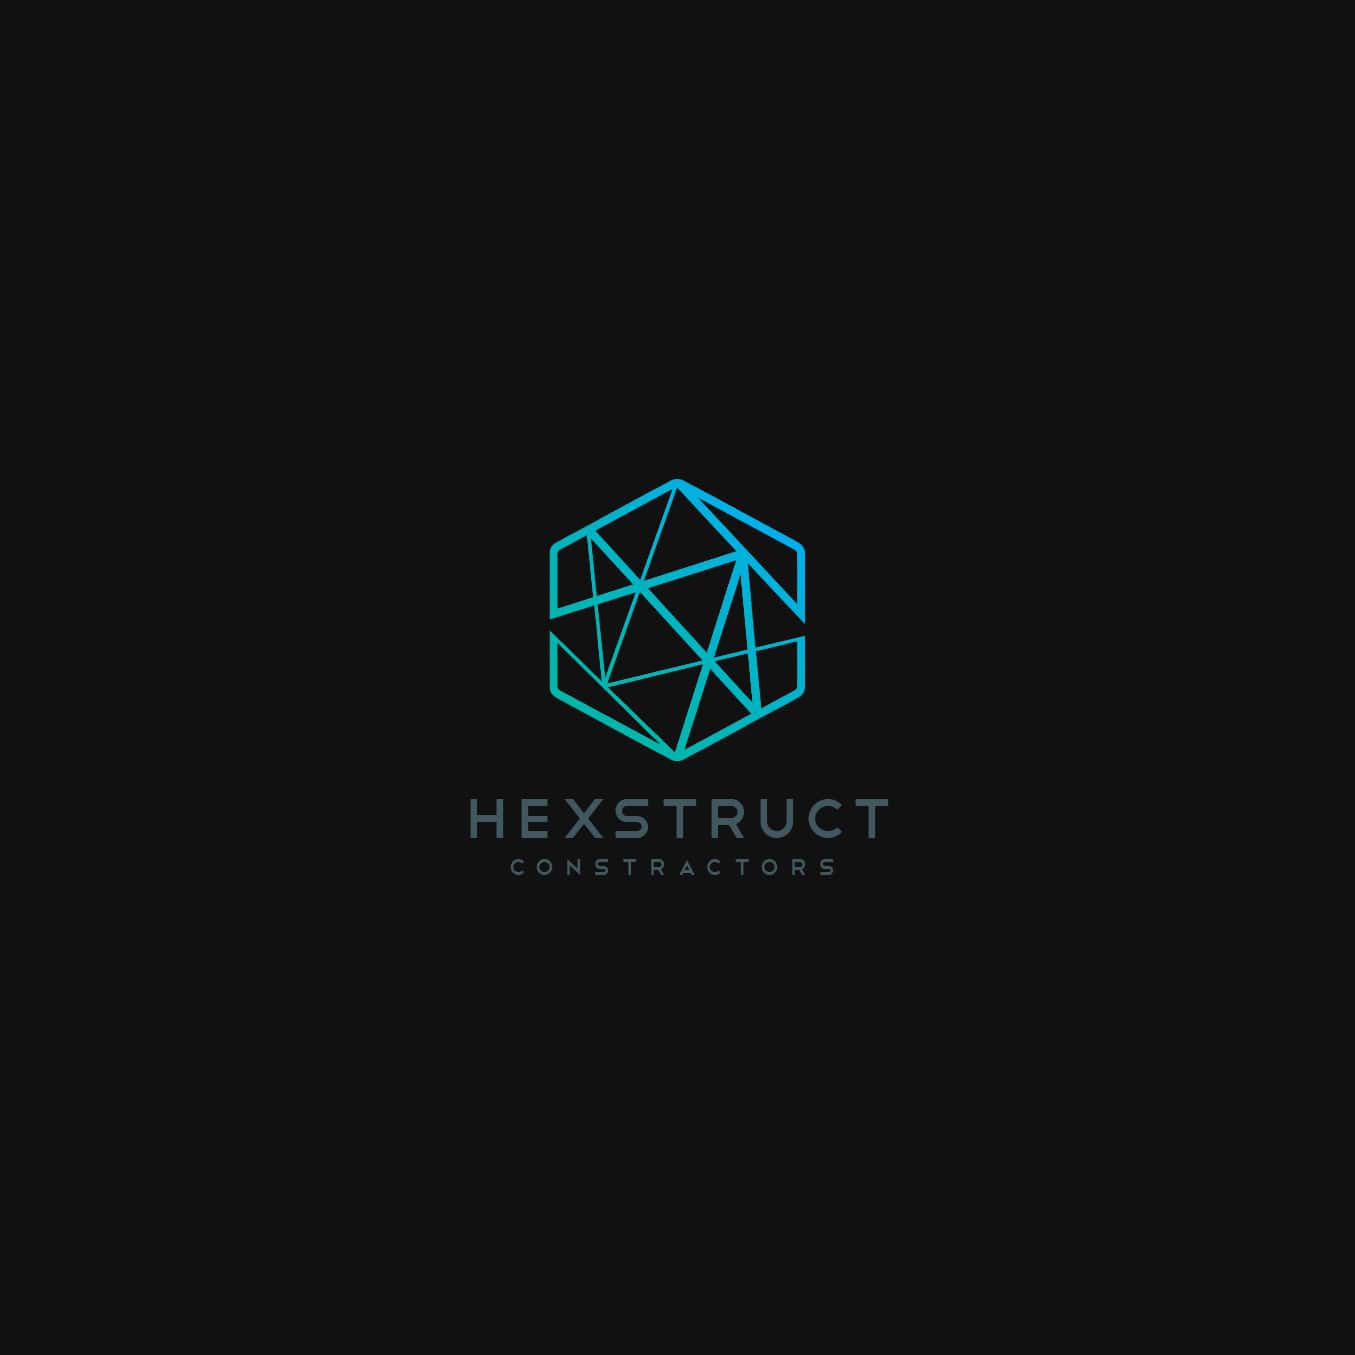 Hexstruct Consulting